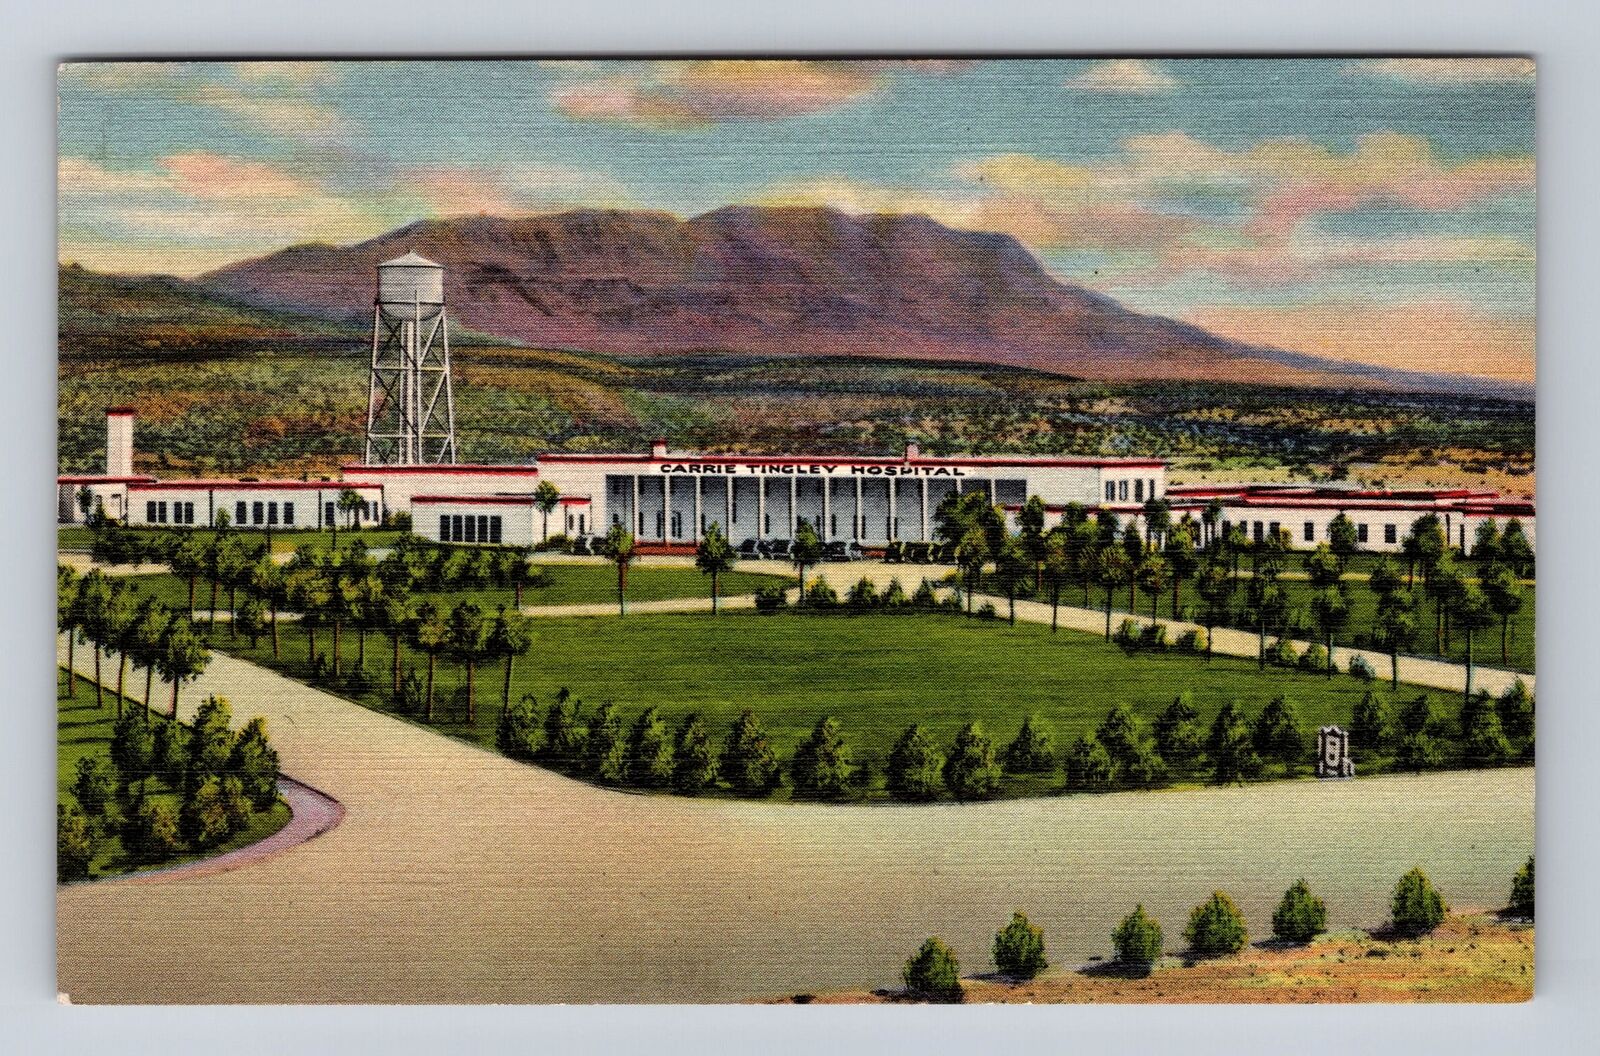 Hot Springs NM-New Mexico, Carrie Tingley Hospital, Vintage c1942 Postcard